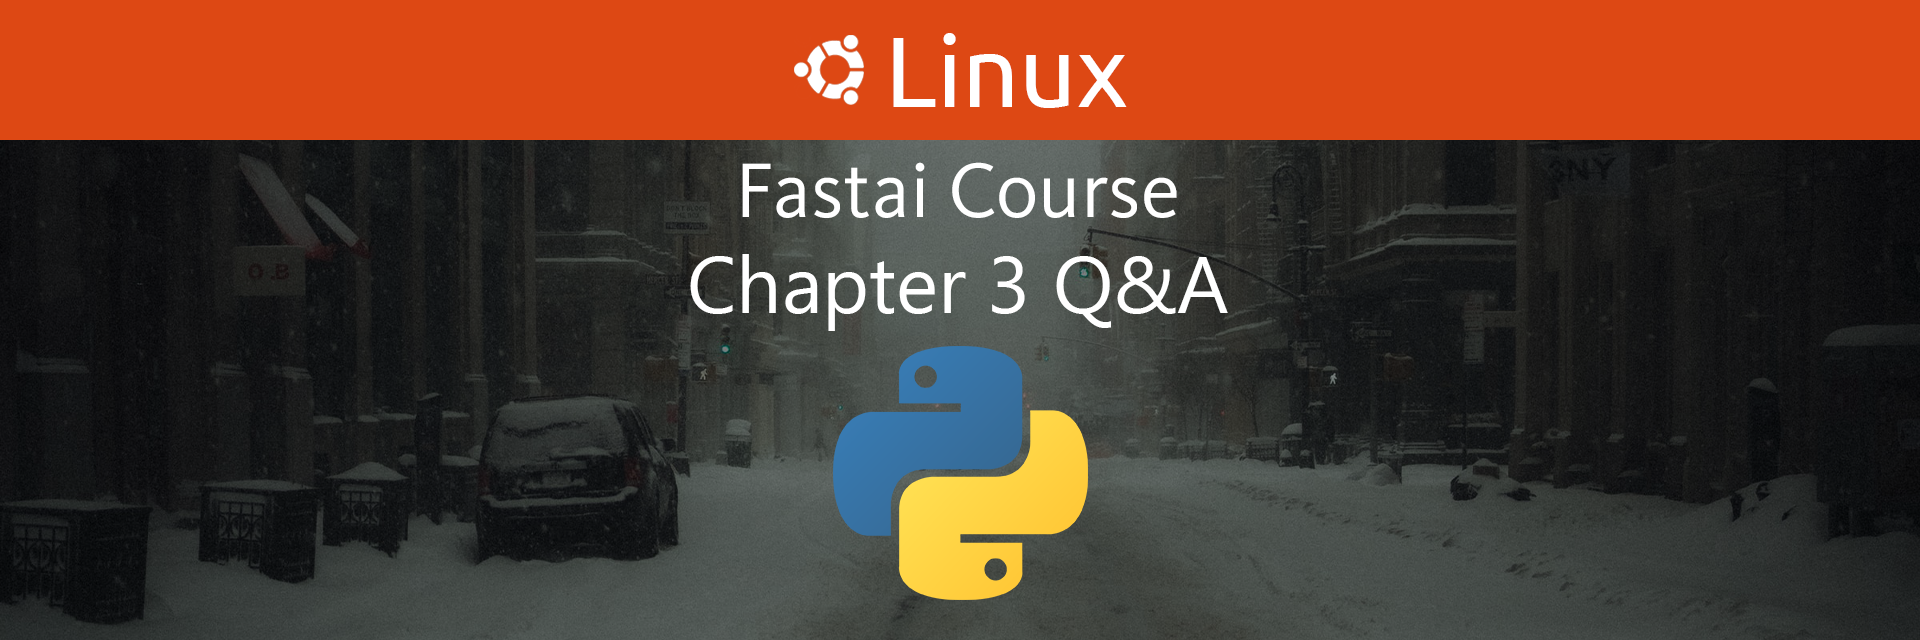 Fastai Course Chapter 3 Q&A on Linux